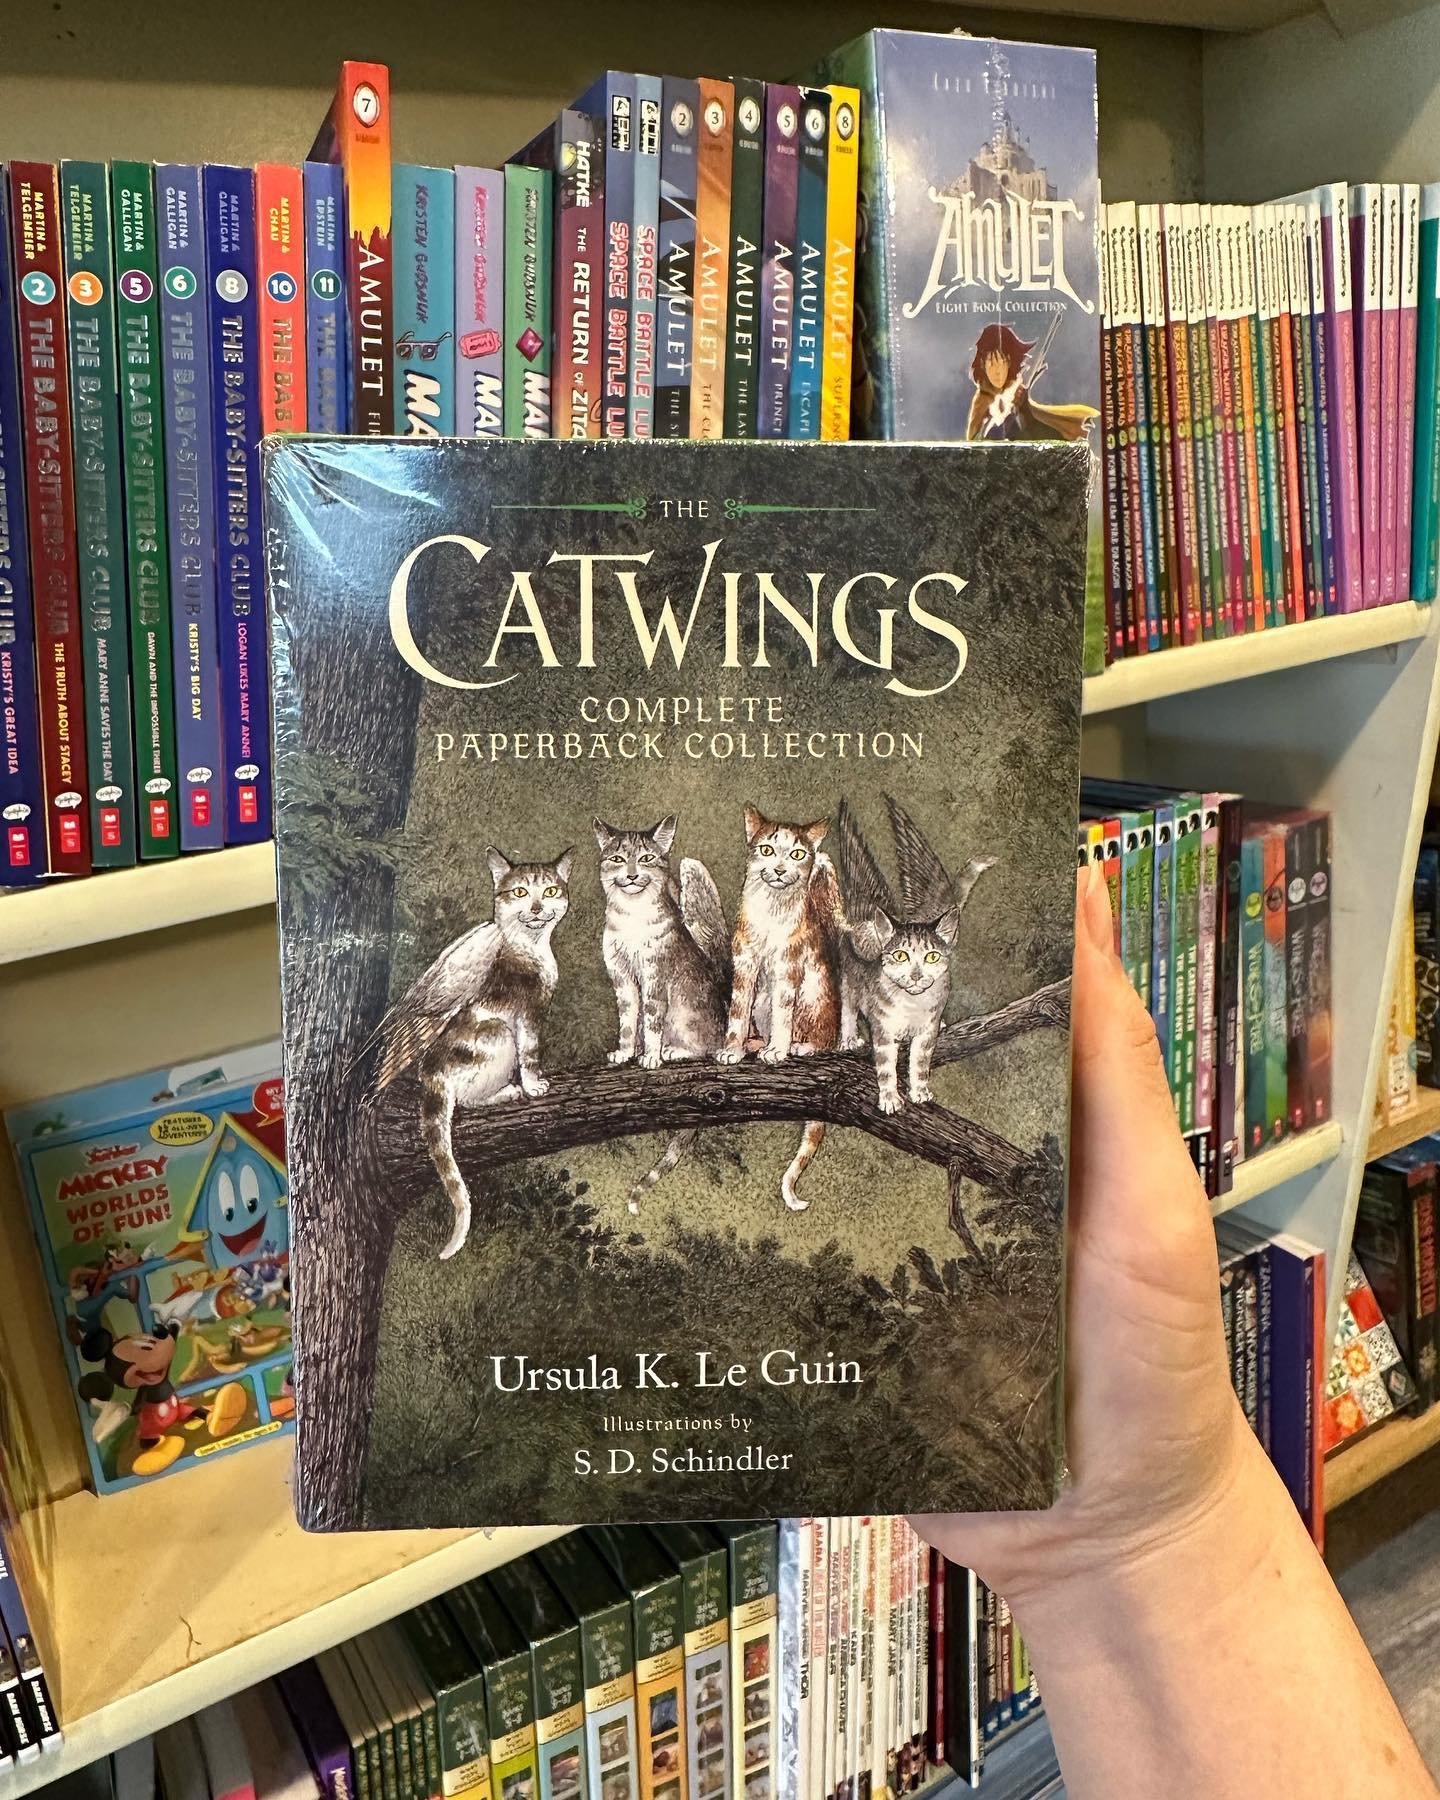 Are you Team 🐱 or Team 🐶? We have books for all sorts of animal lovers and for all ages too ❤️